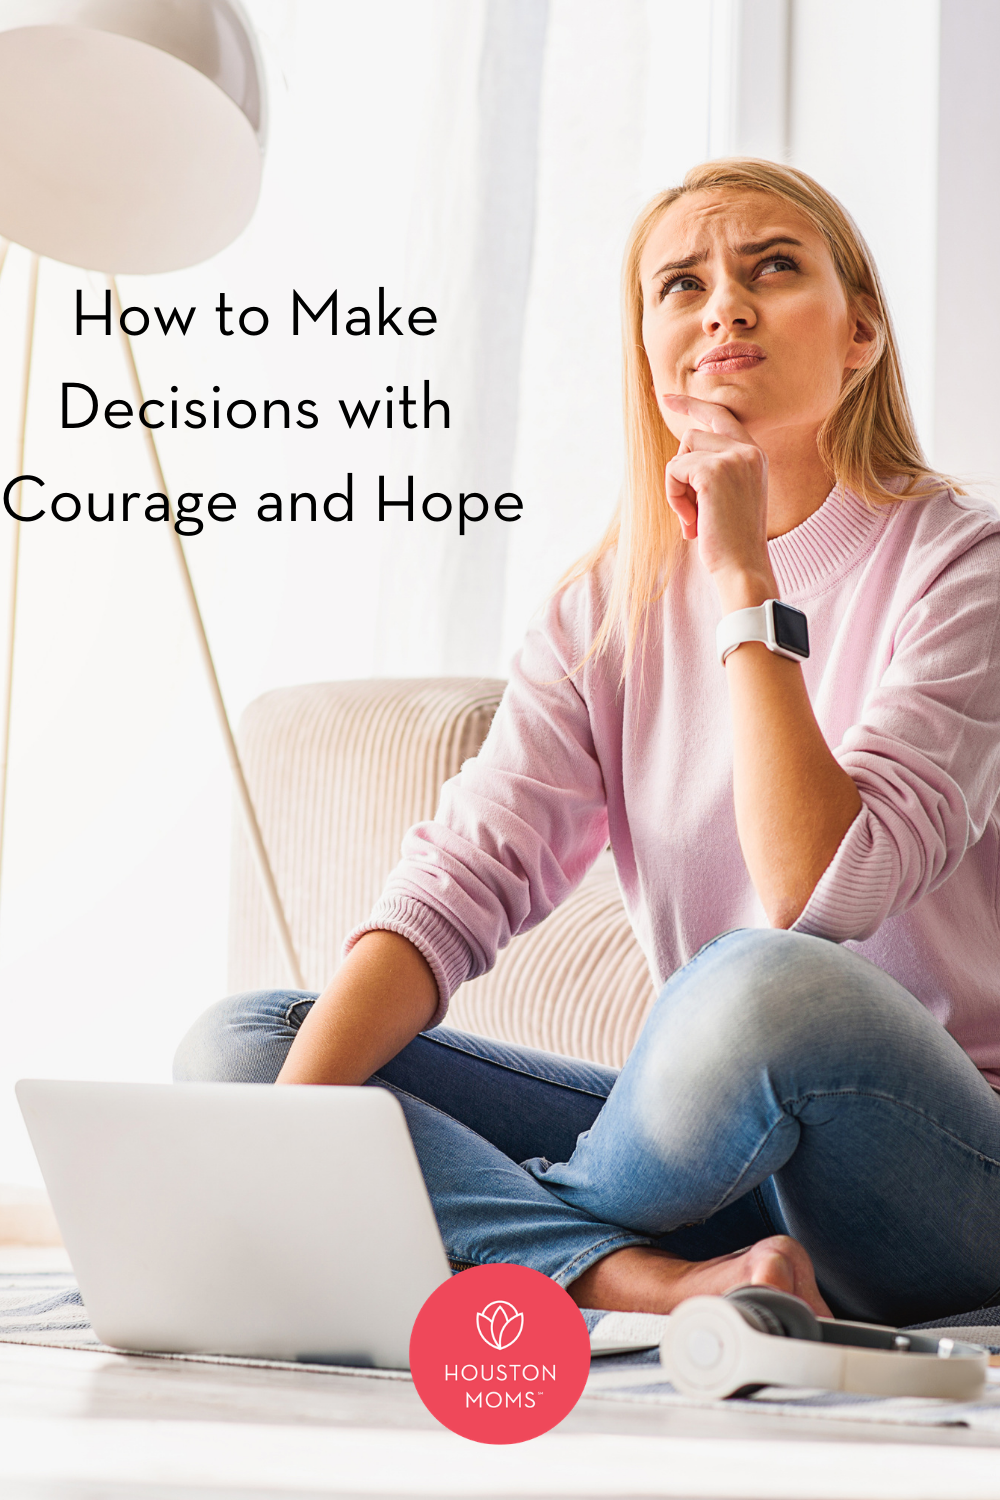 Houston Moms "How to Make Decisions with Courage and Hope" #houstonmoms #momsaroundhouston